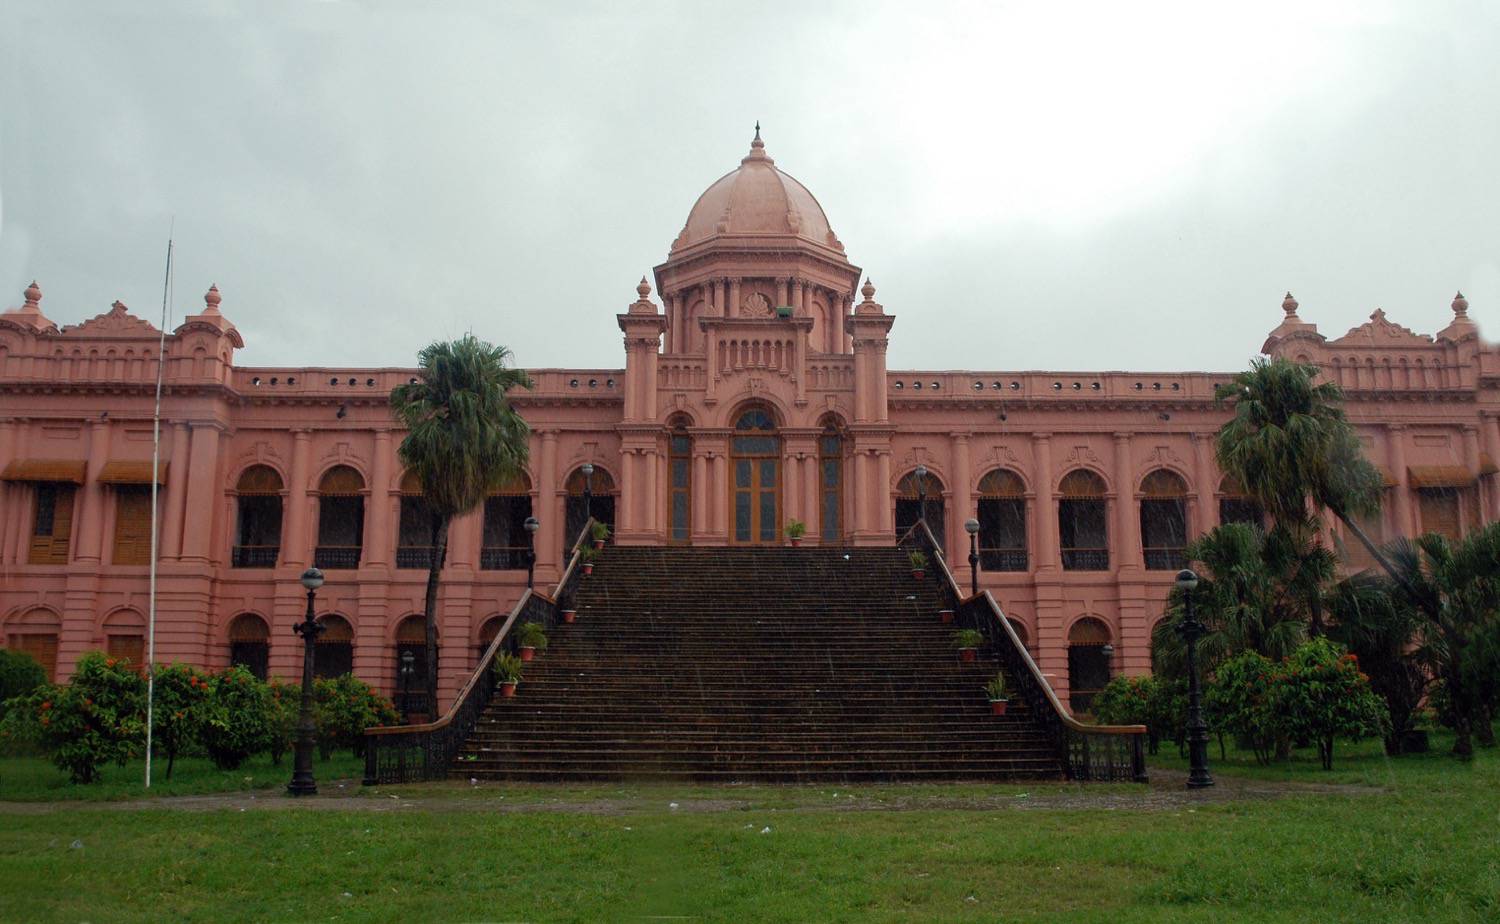 Exterior view of the Ahsan Manzil Museum, showing the palace façade and grand steps.